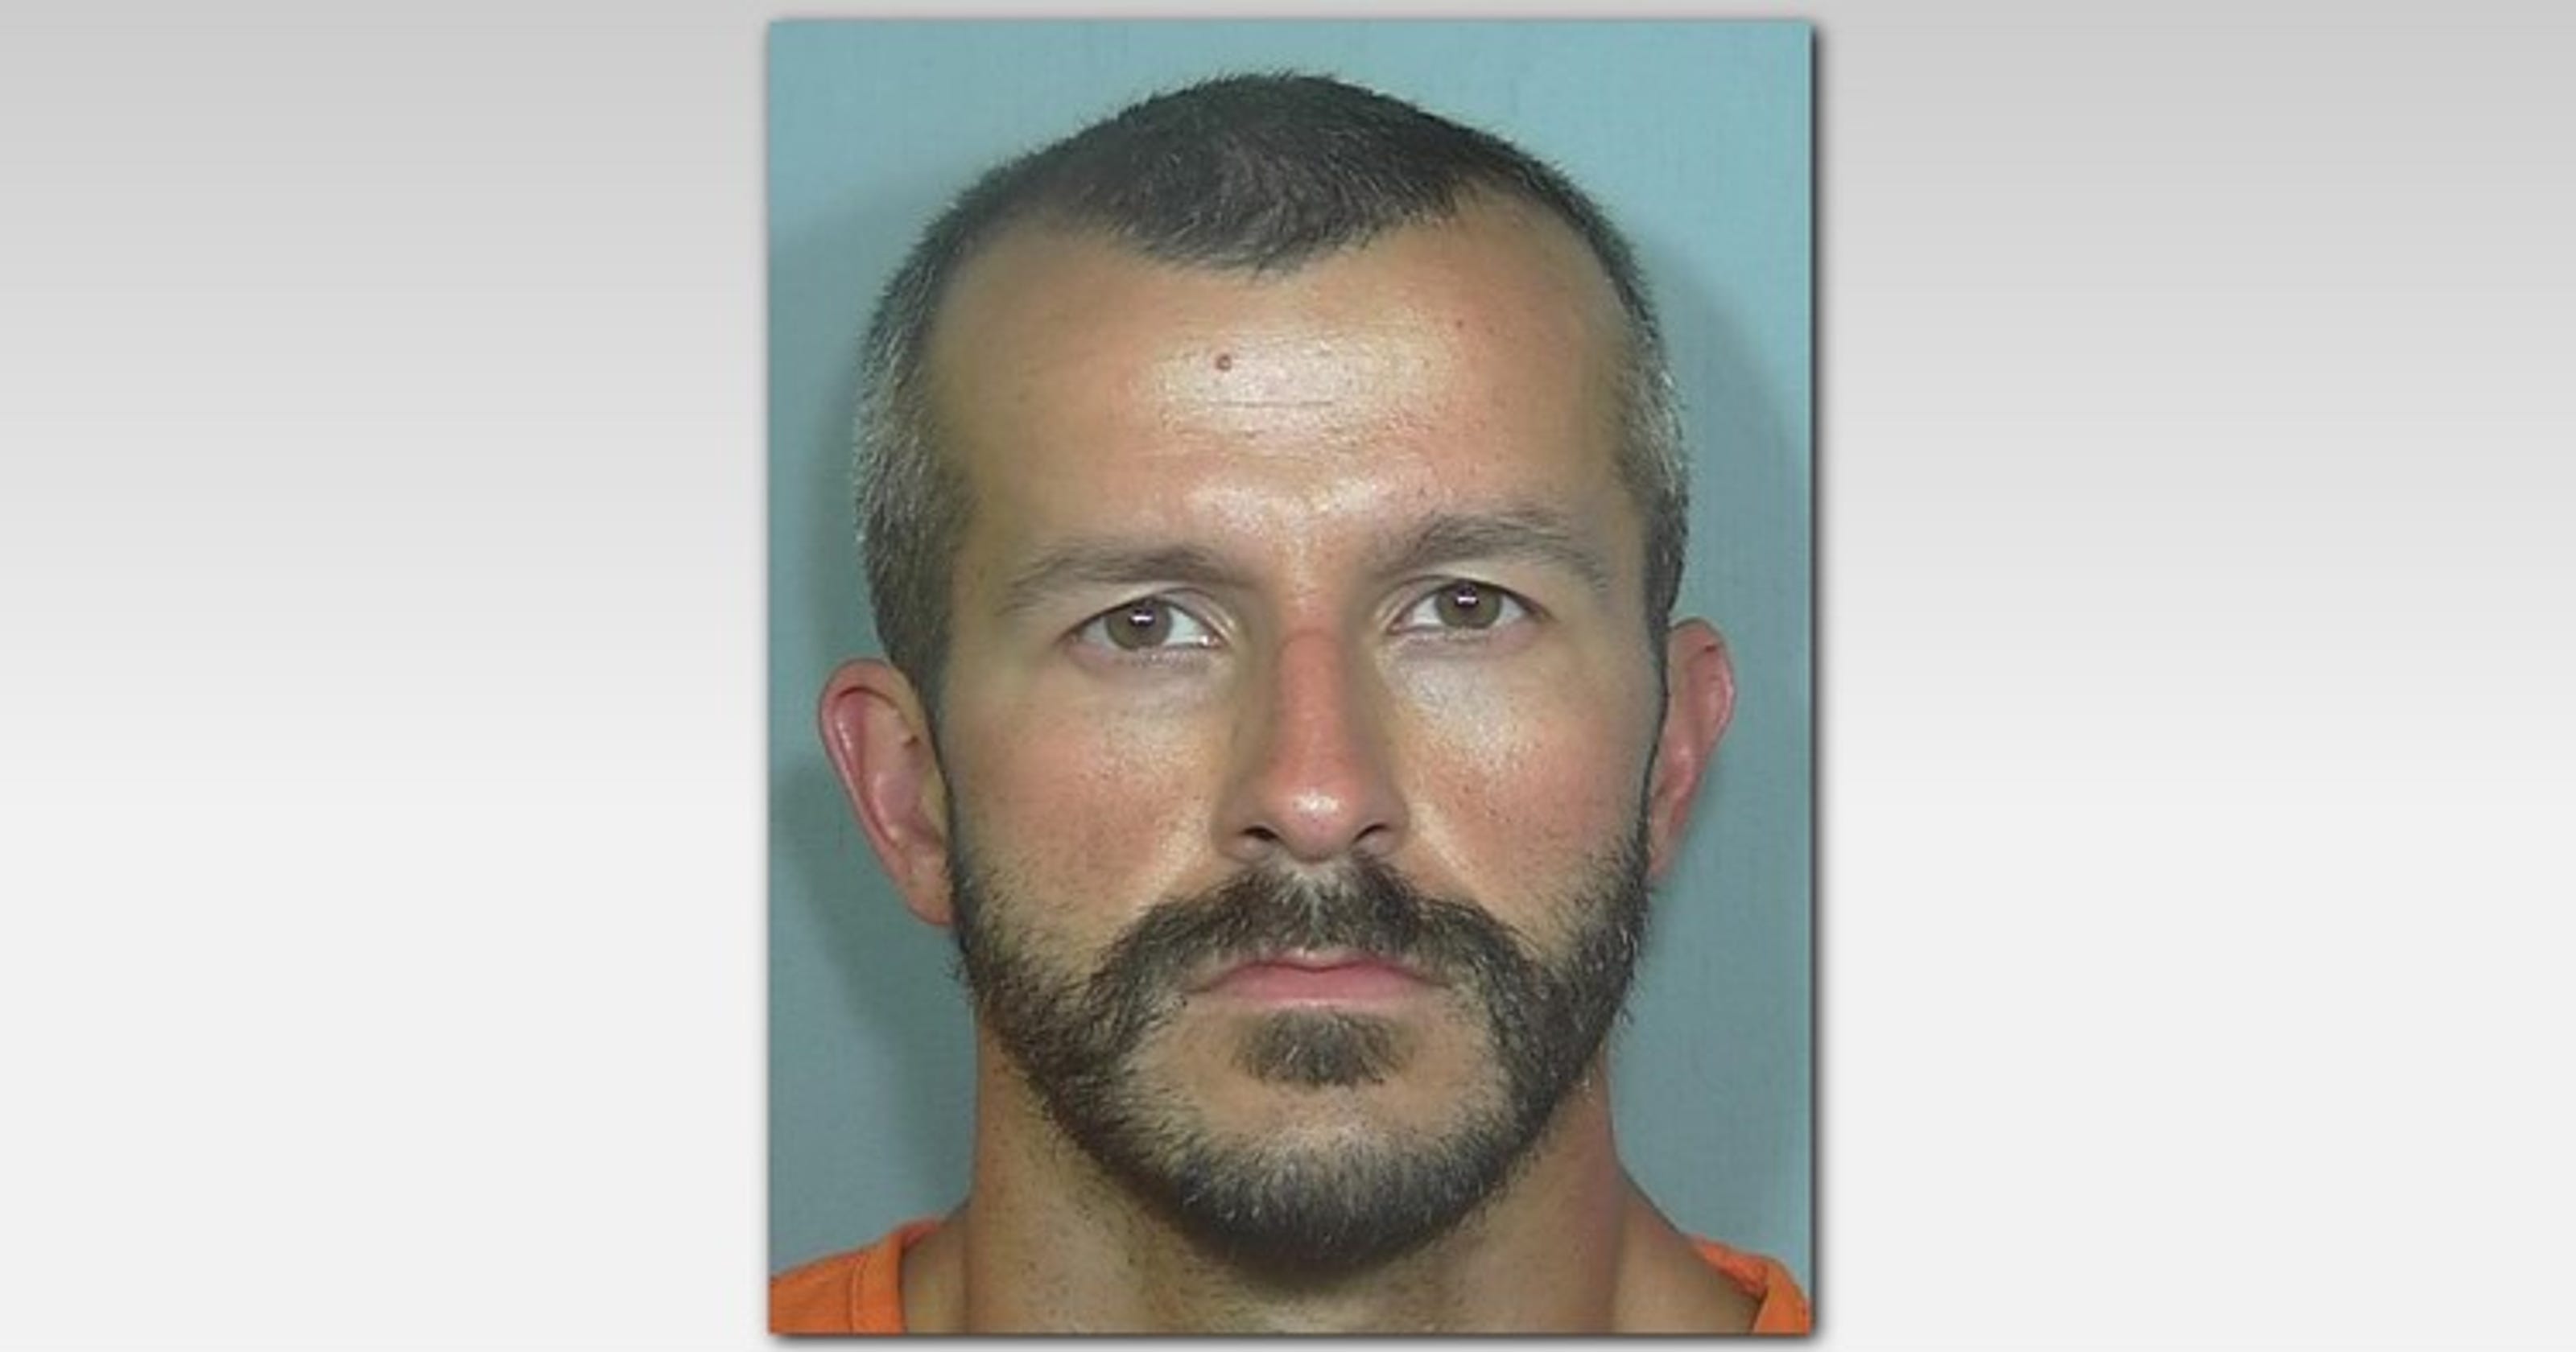 Colorado man Chris Watts suspected of killing pregnant wife, daughters